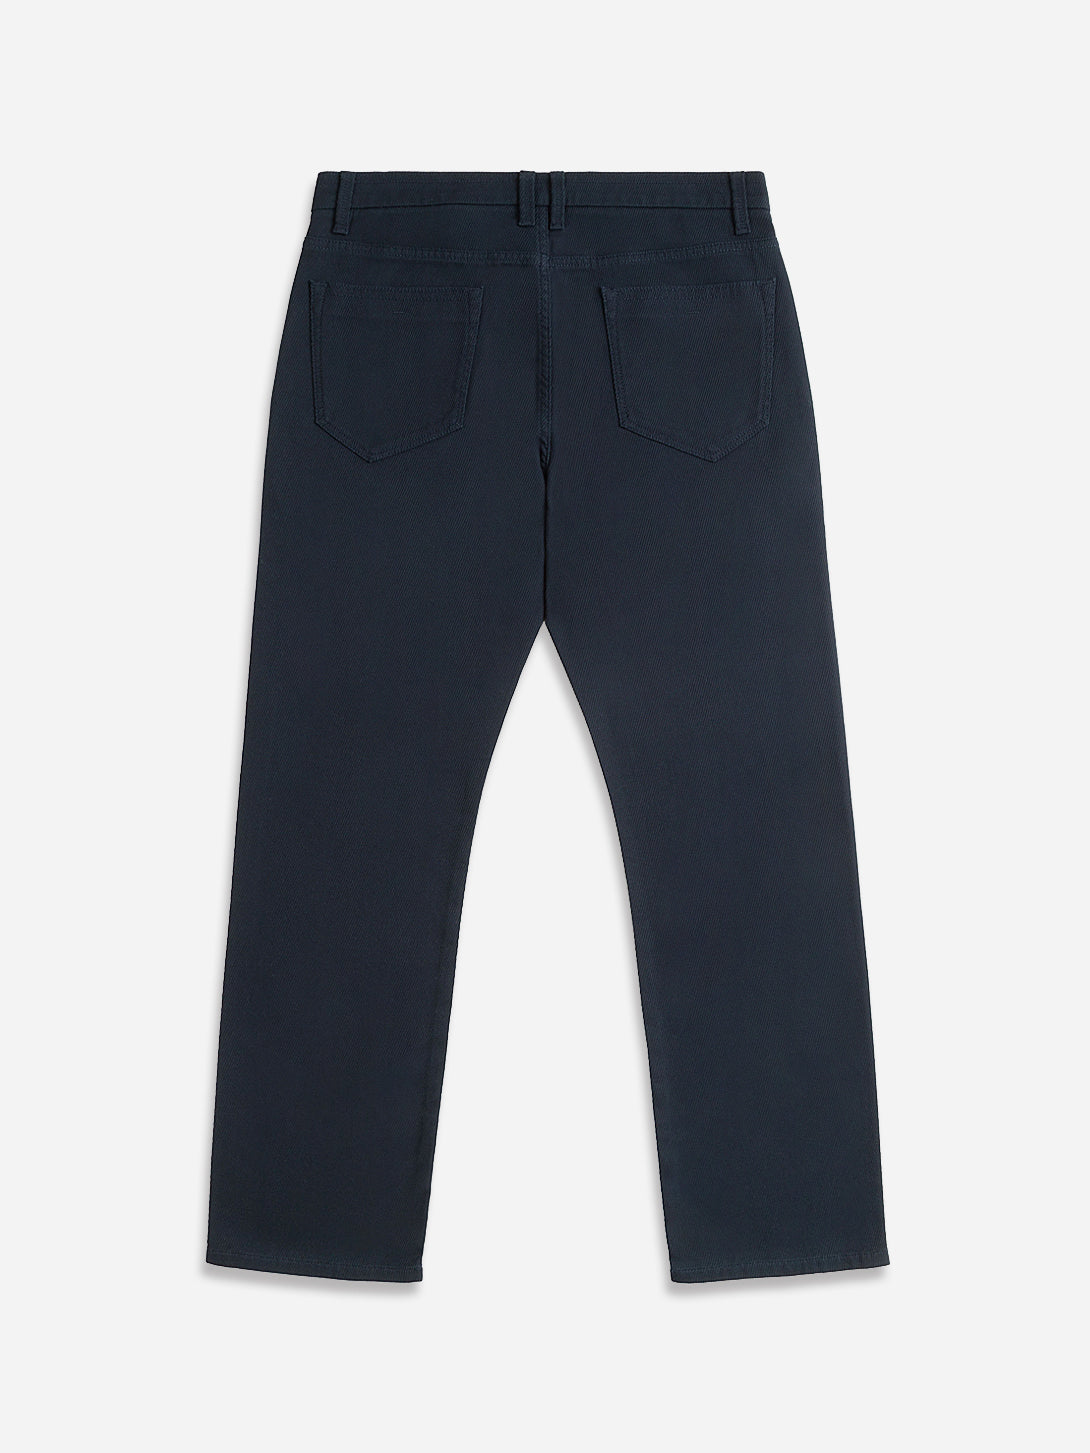 DK Navy Patchwork Chino O.N.S Mens FW22